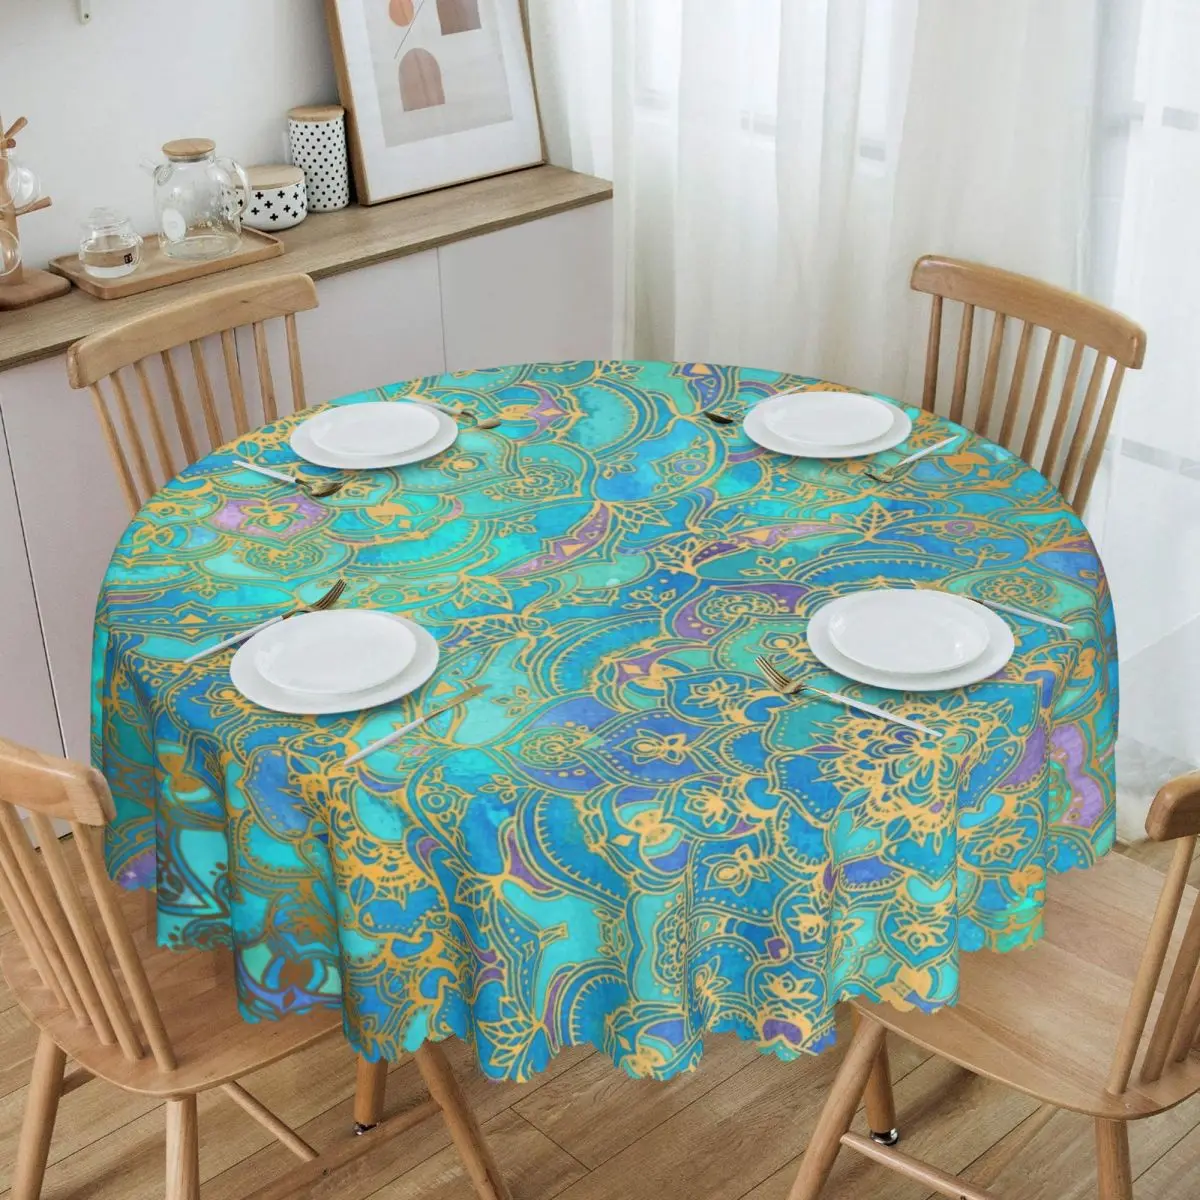 

Round Waterproof Sapphire Jade Stained Glass Mandalas Table Cover Boho Flower Pattern Tablecloth for Picnic 60 inch Table Cloth